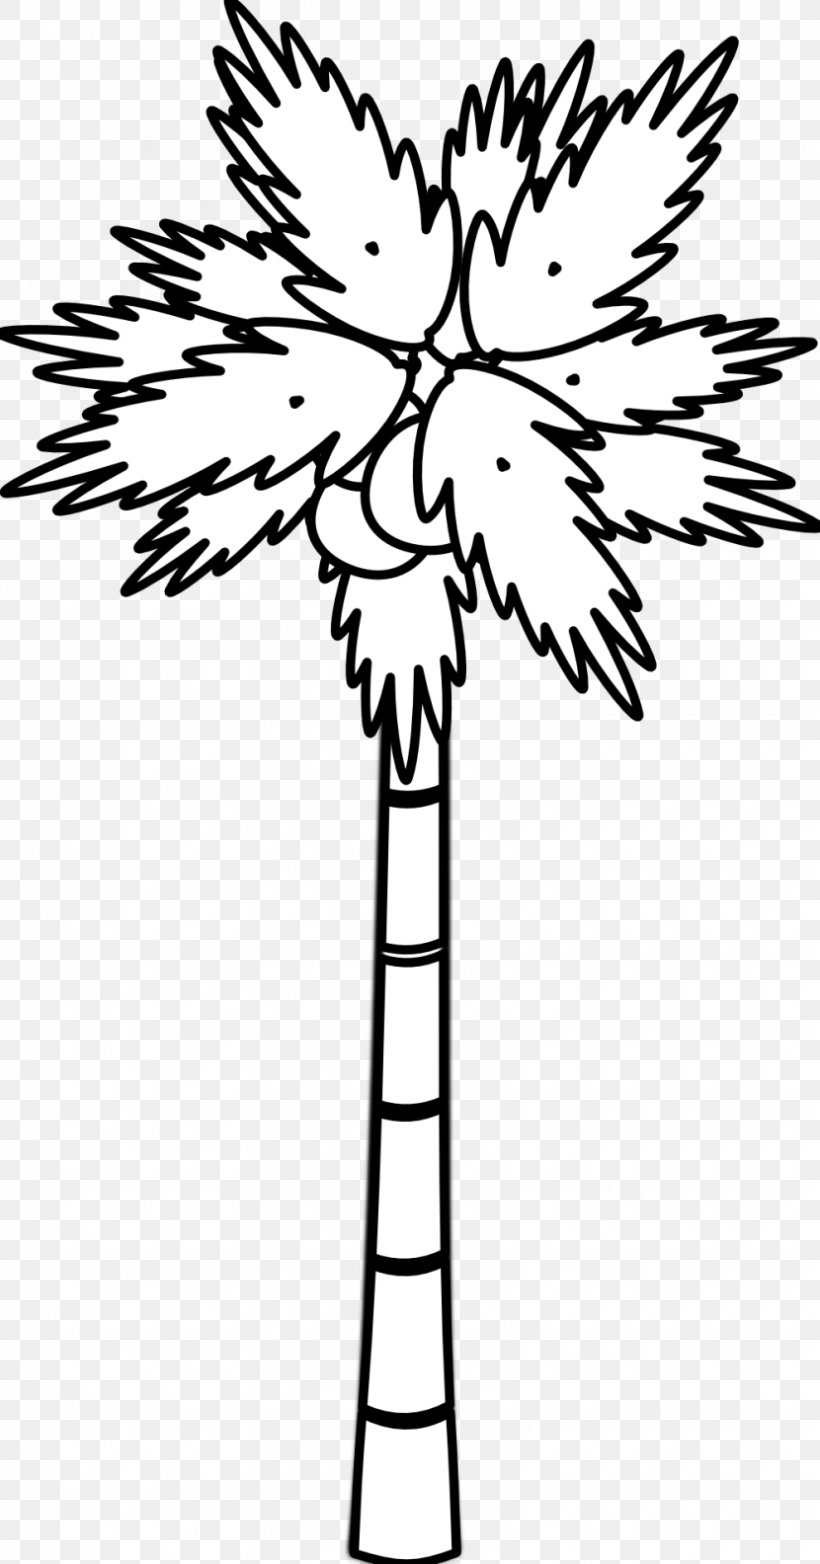 Coconut Tree Arecaceae Clip Art, PNG, 830x1584px, Coconut, Arecaceae, Black, Black And White, Branch Download Free